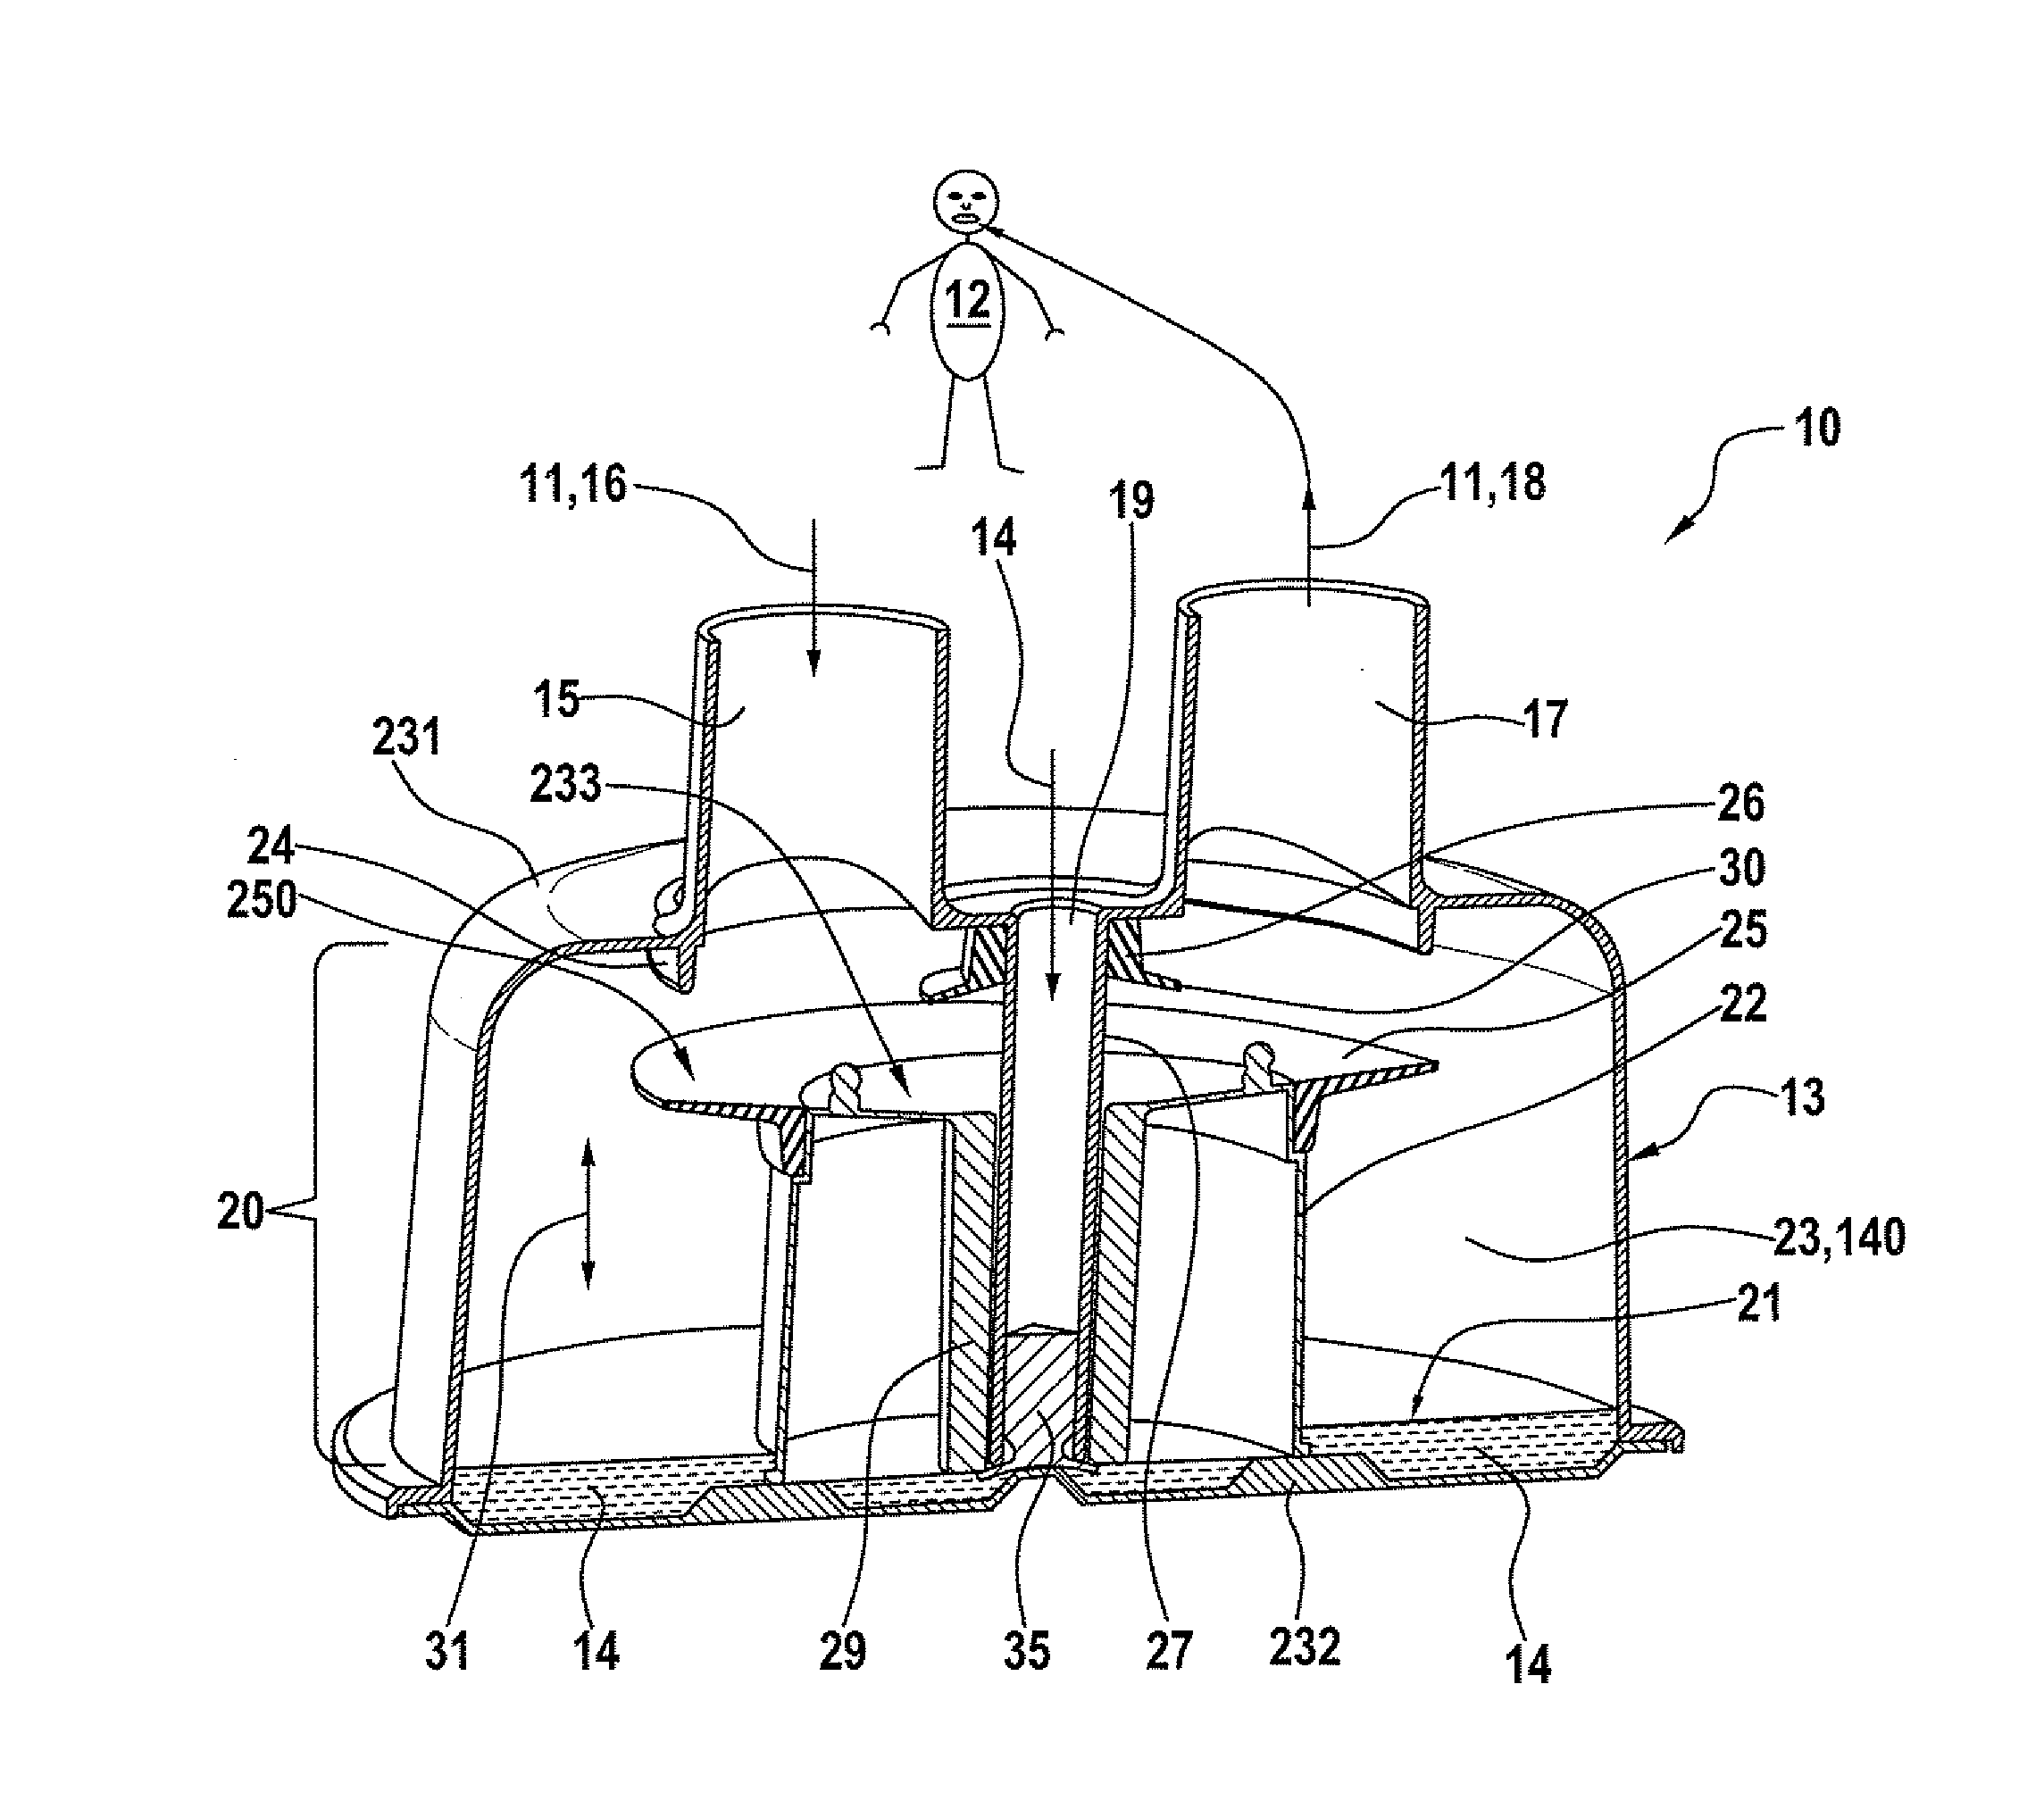 Device for humidifying breathing air for artificial respiration